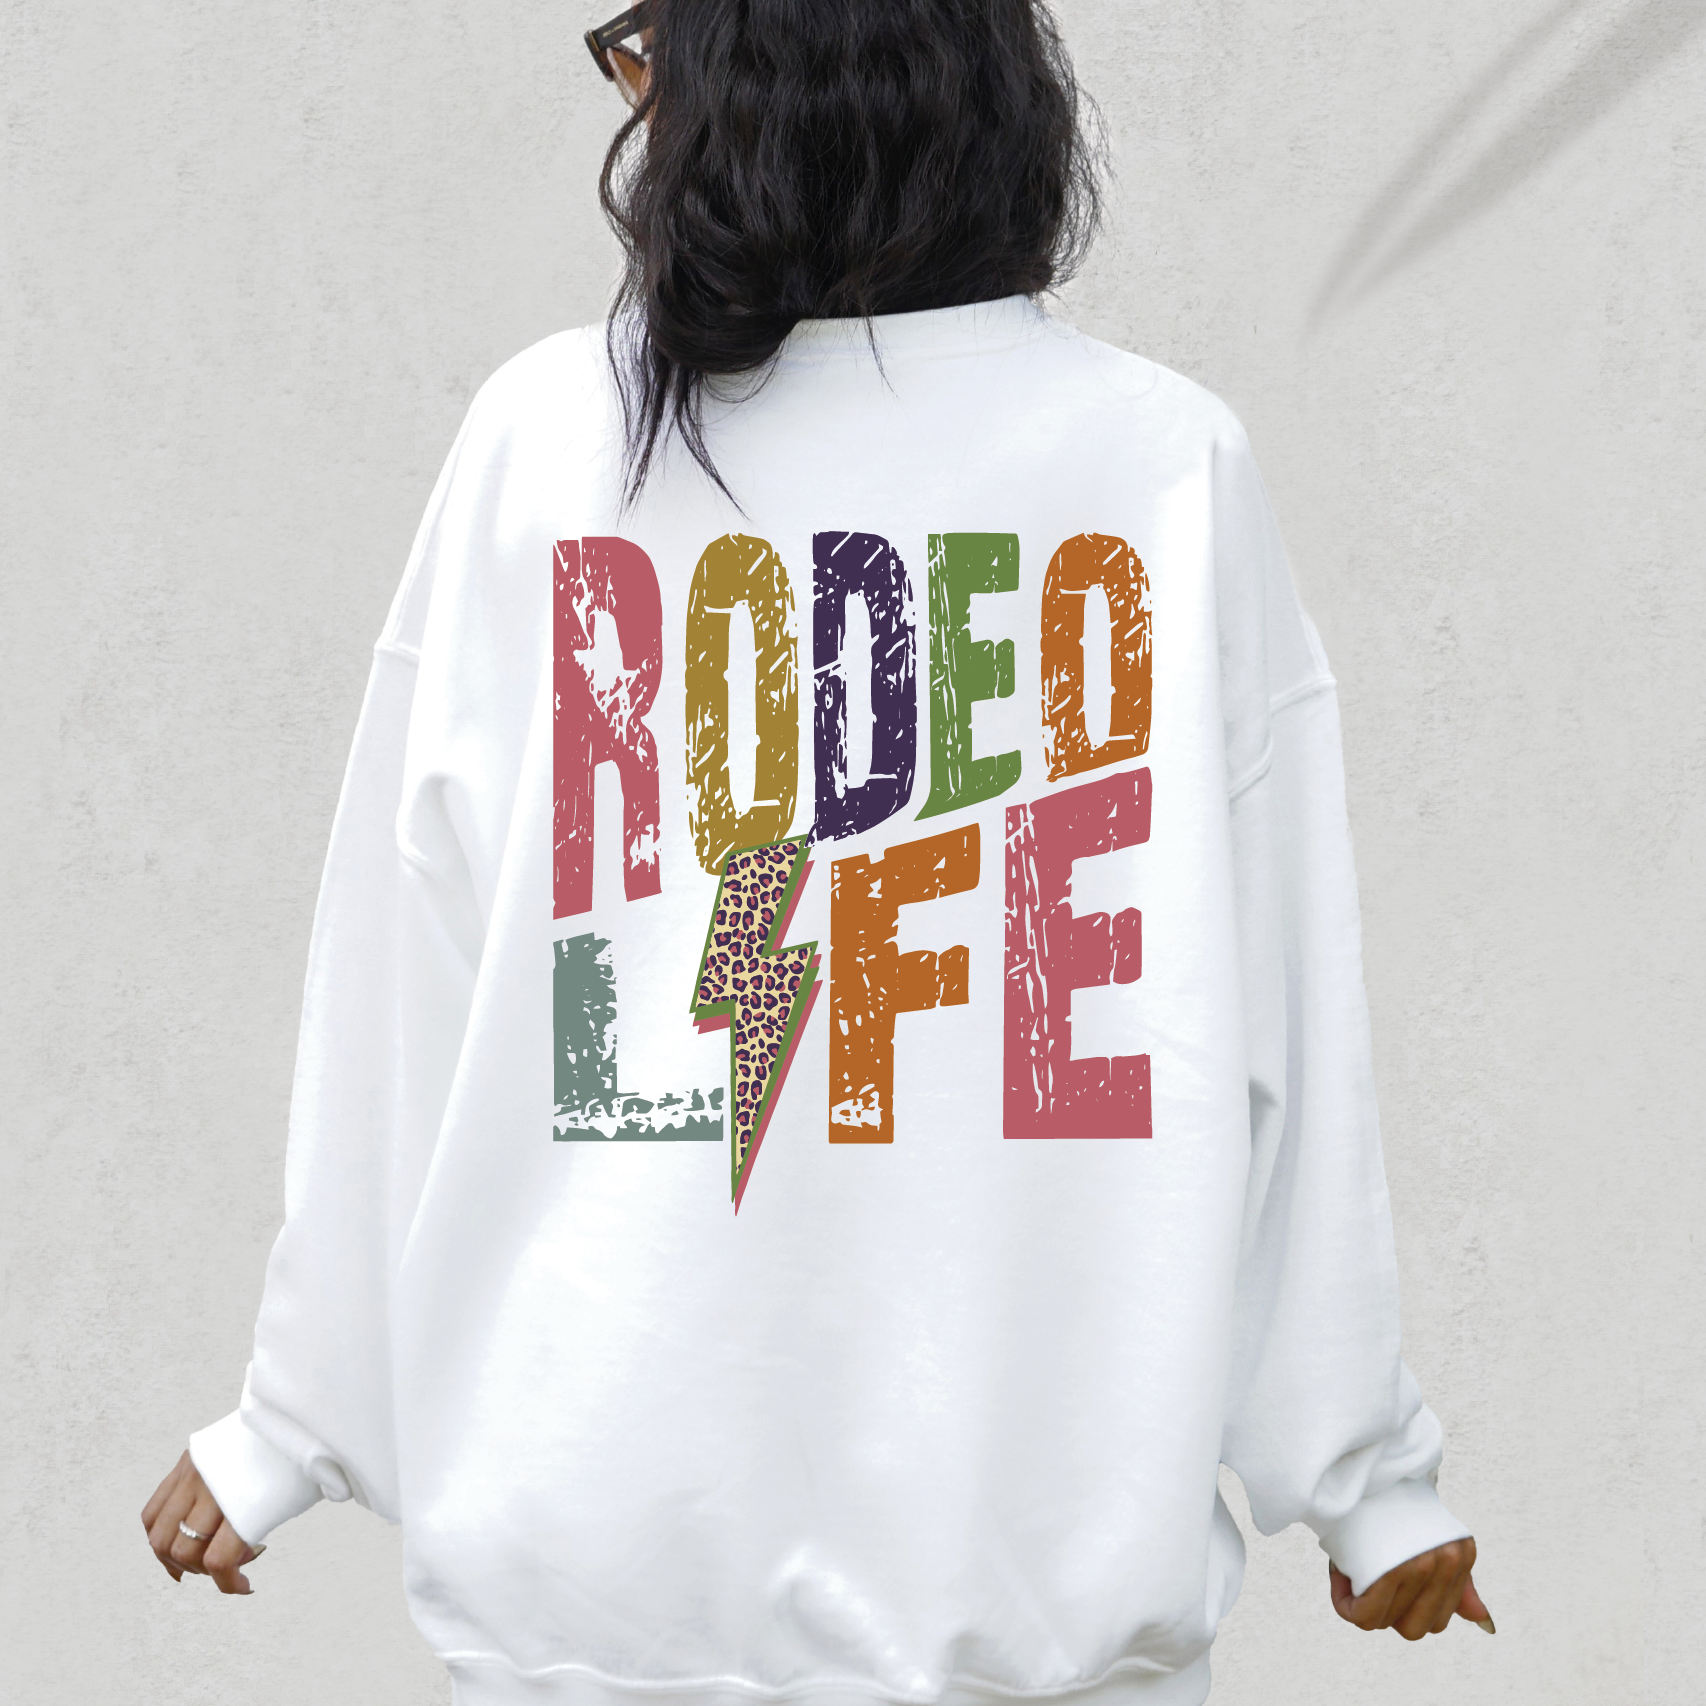 a woman wearing a white sweatshirt with the word rodeo life printed on it